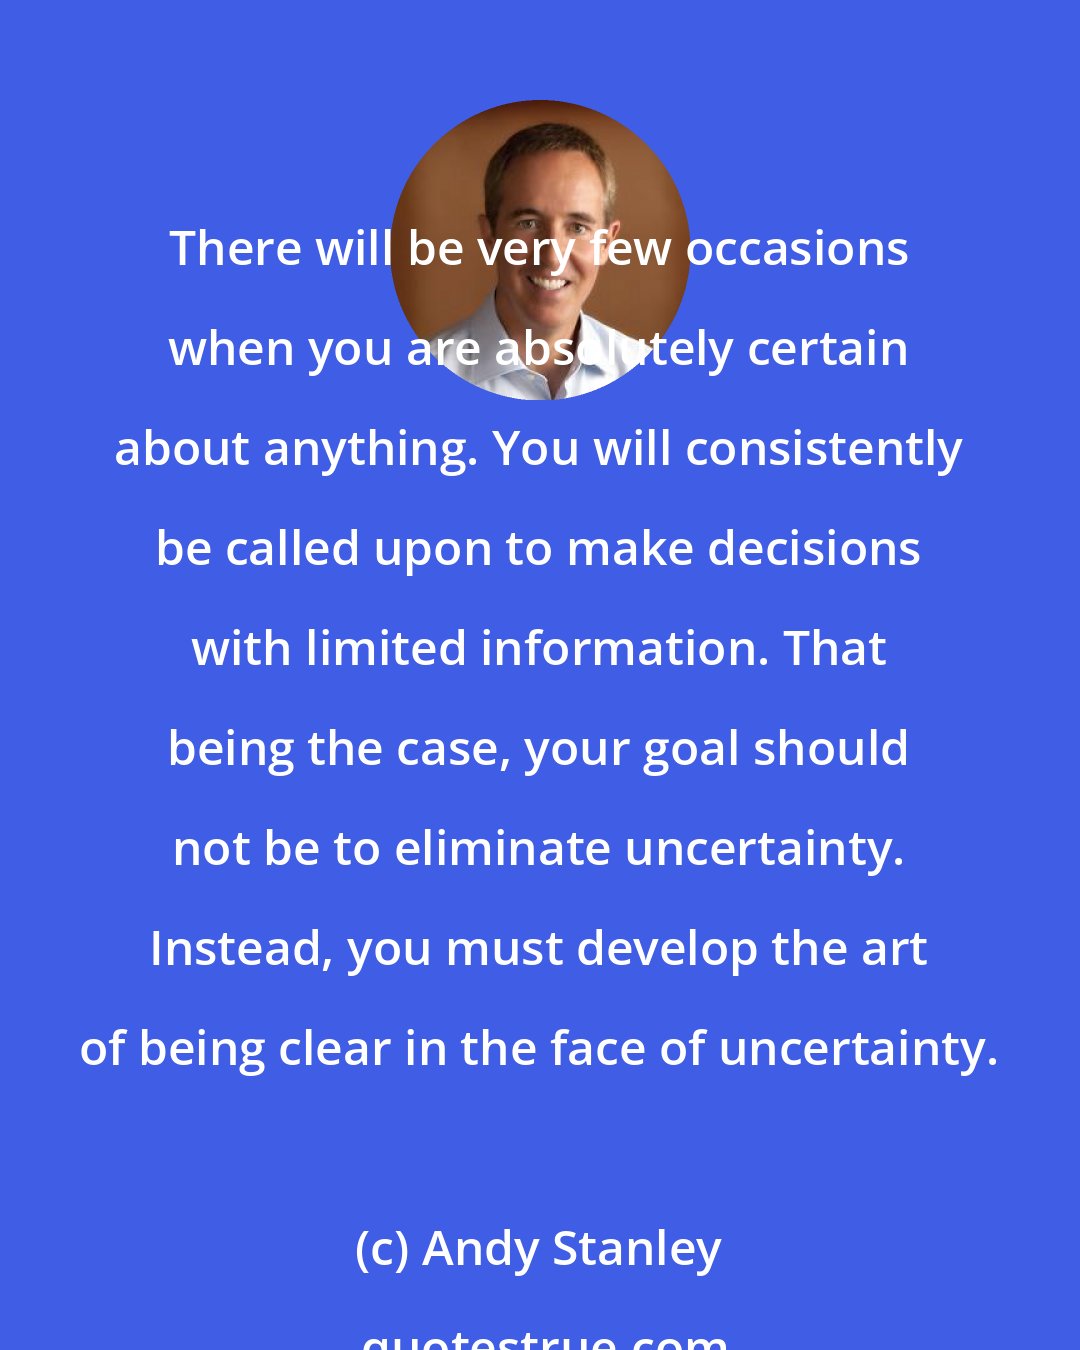 Andy Stanley: There will be very few occasions when you are absolutely certain about anything. You will consistently be called upon to make decisions with limited information. That being the case, your goal should not be to eliminate uncertainty. Instead, you must develop the art of being clear in the face of uncertainty.